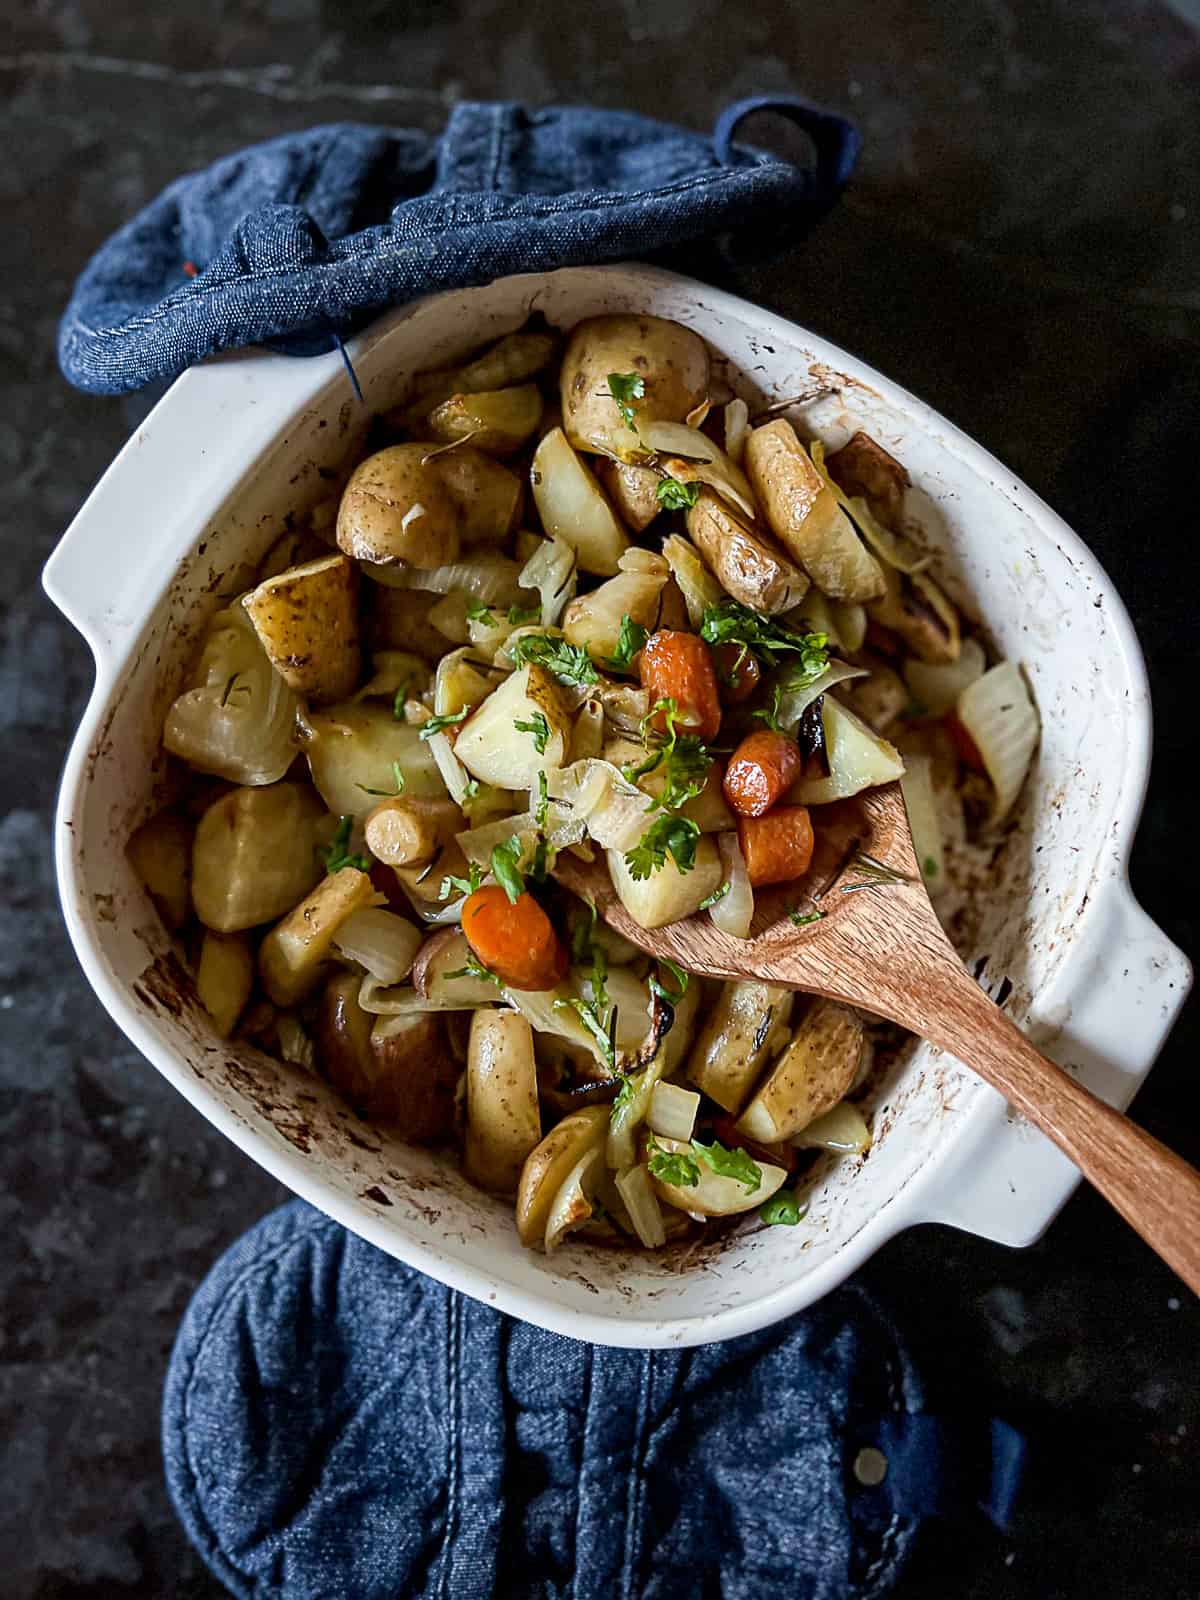 Casserole Dish With Roasted Potatoes Carrots and Onions